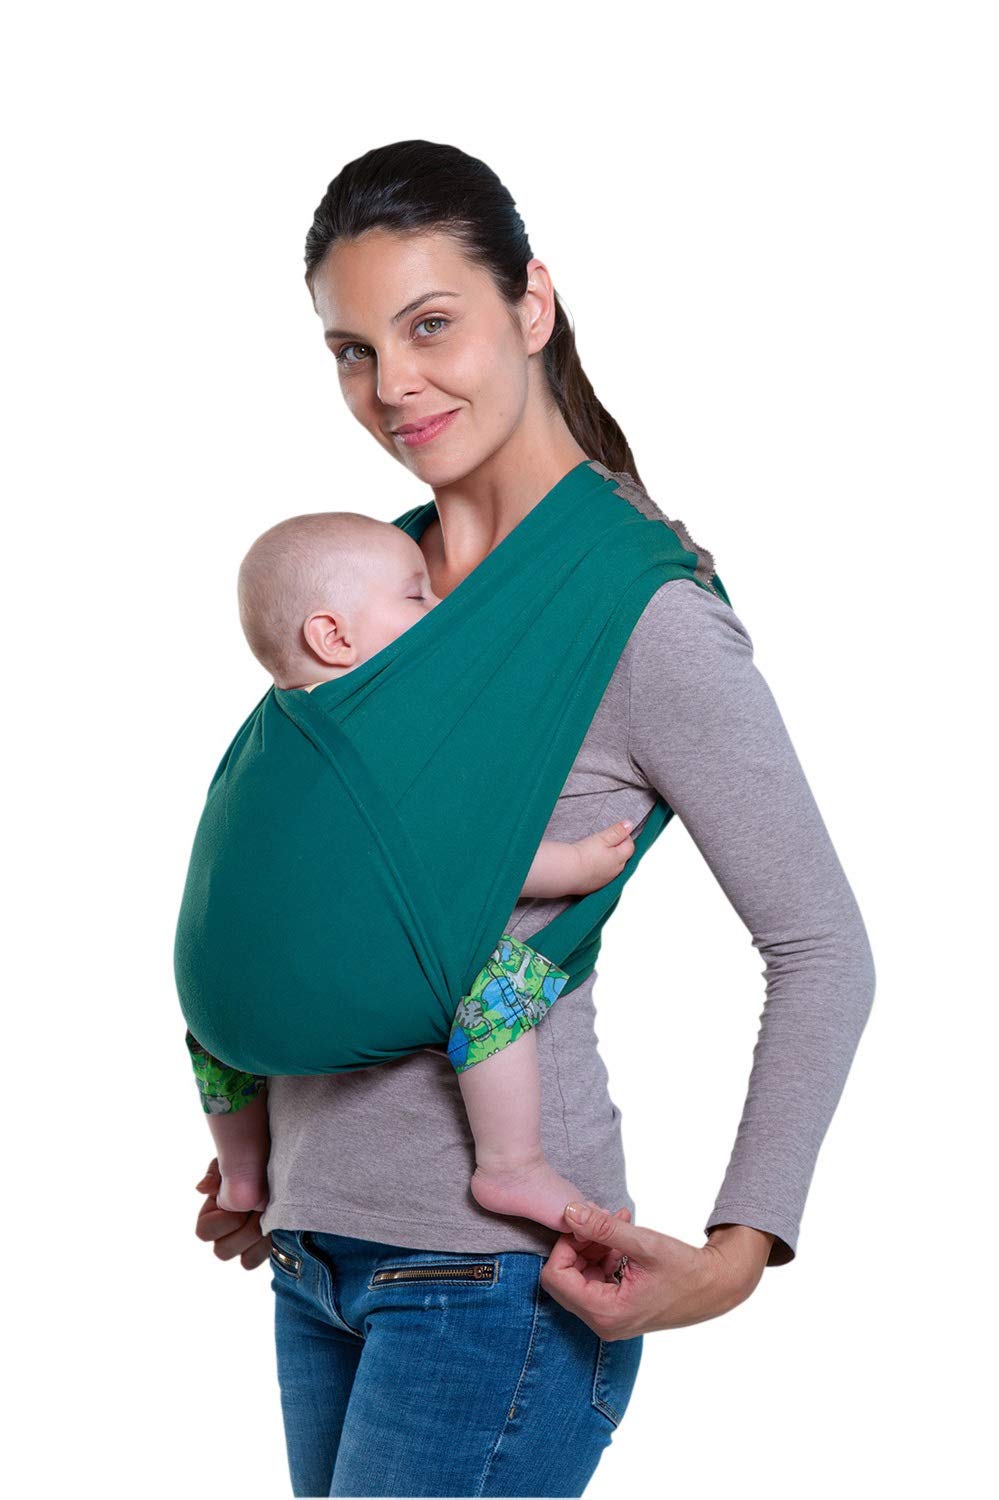 AMAZONAS Baby Carrier Sling, Belly Carrier, Petrol Blue, 2 Loops, Stress-Free, Without Knots, 4 Months - 3 Years, Up to 15 Kg